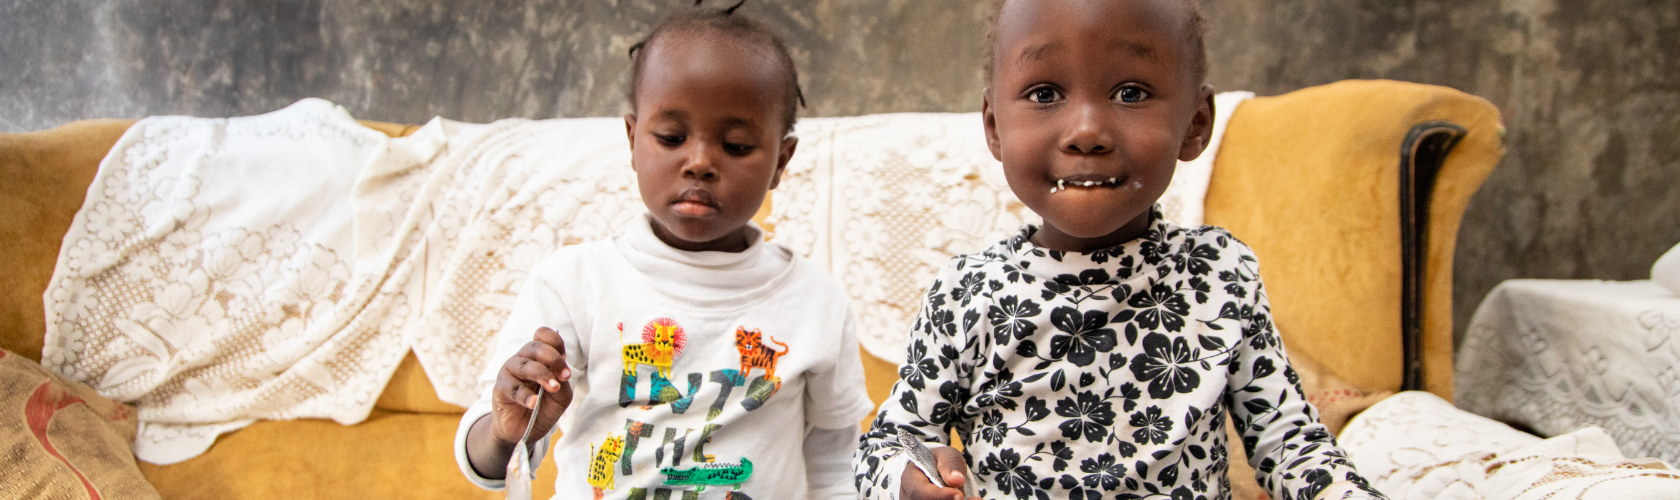 Paving the way to improved nutrition with fortified school meals for students in Tanzania